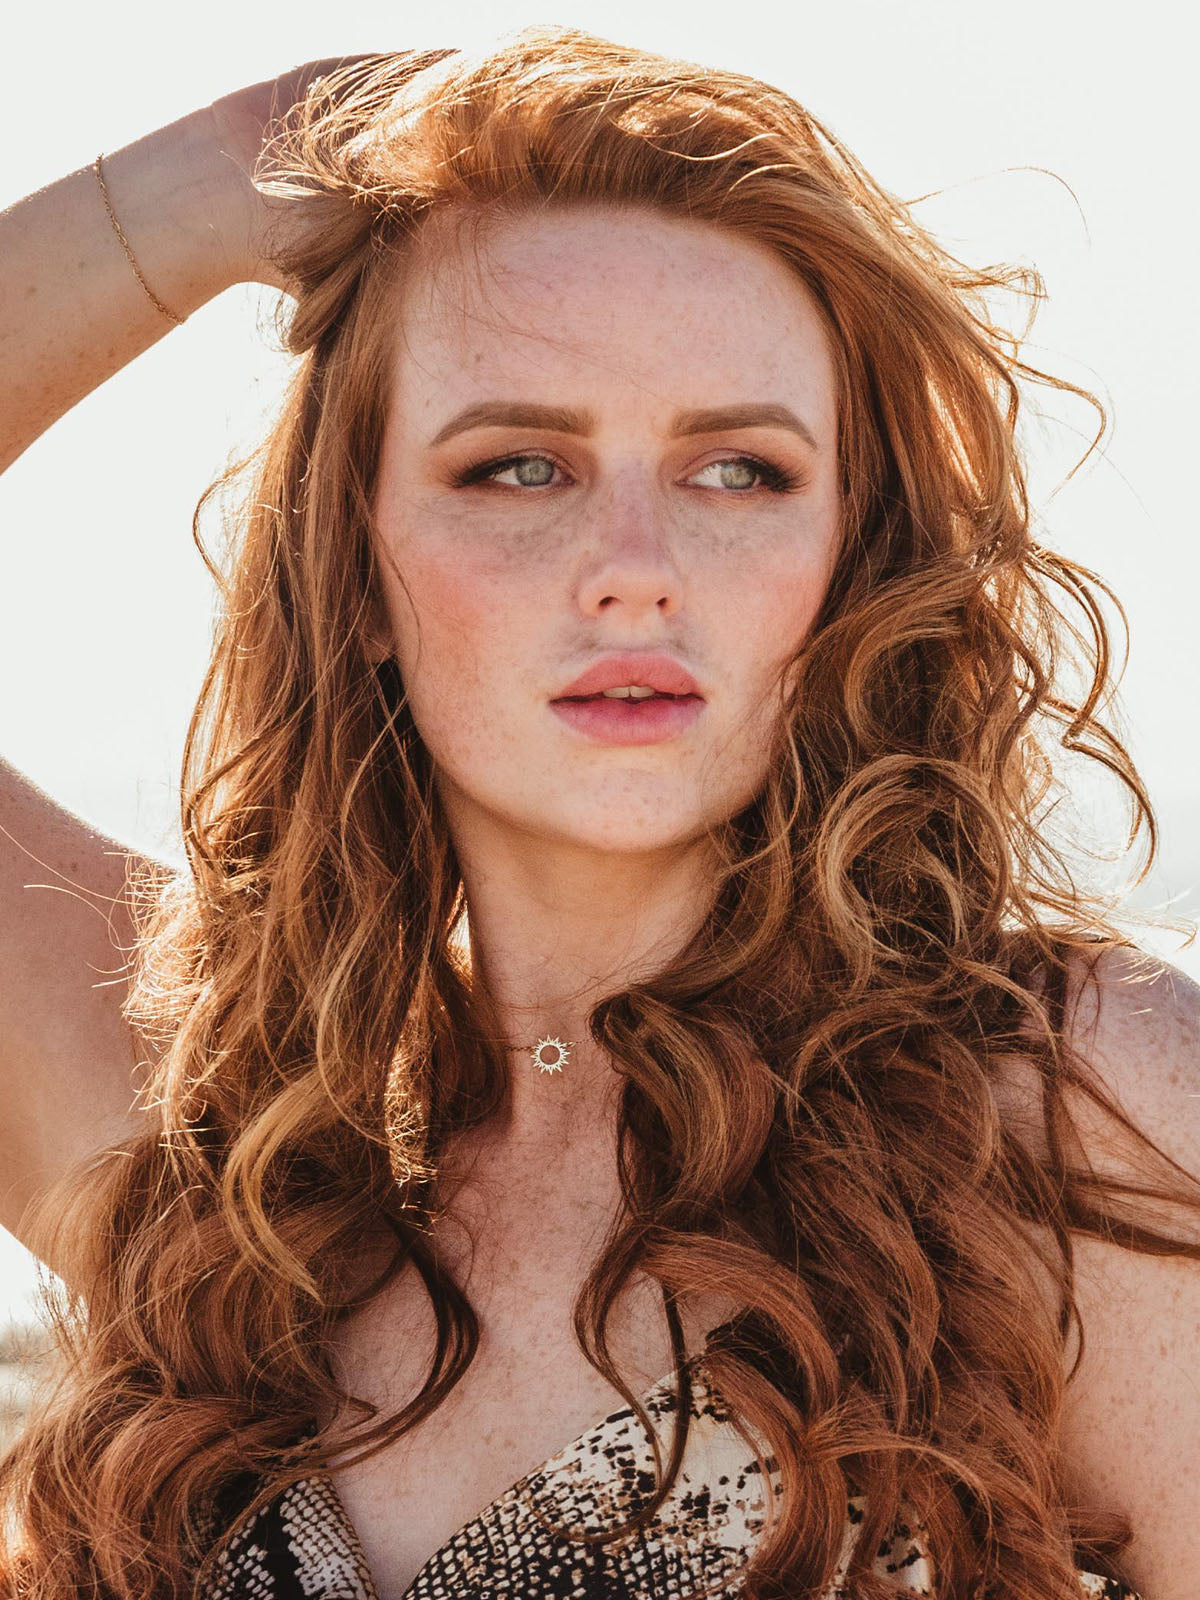 Portrait of female model with red hair wearing the Mallory Sun Chain Pendant necklace.